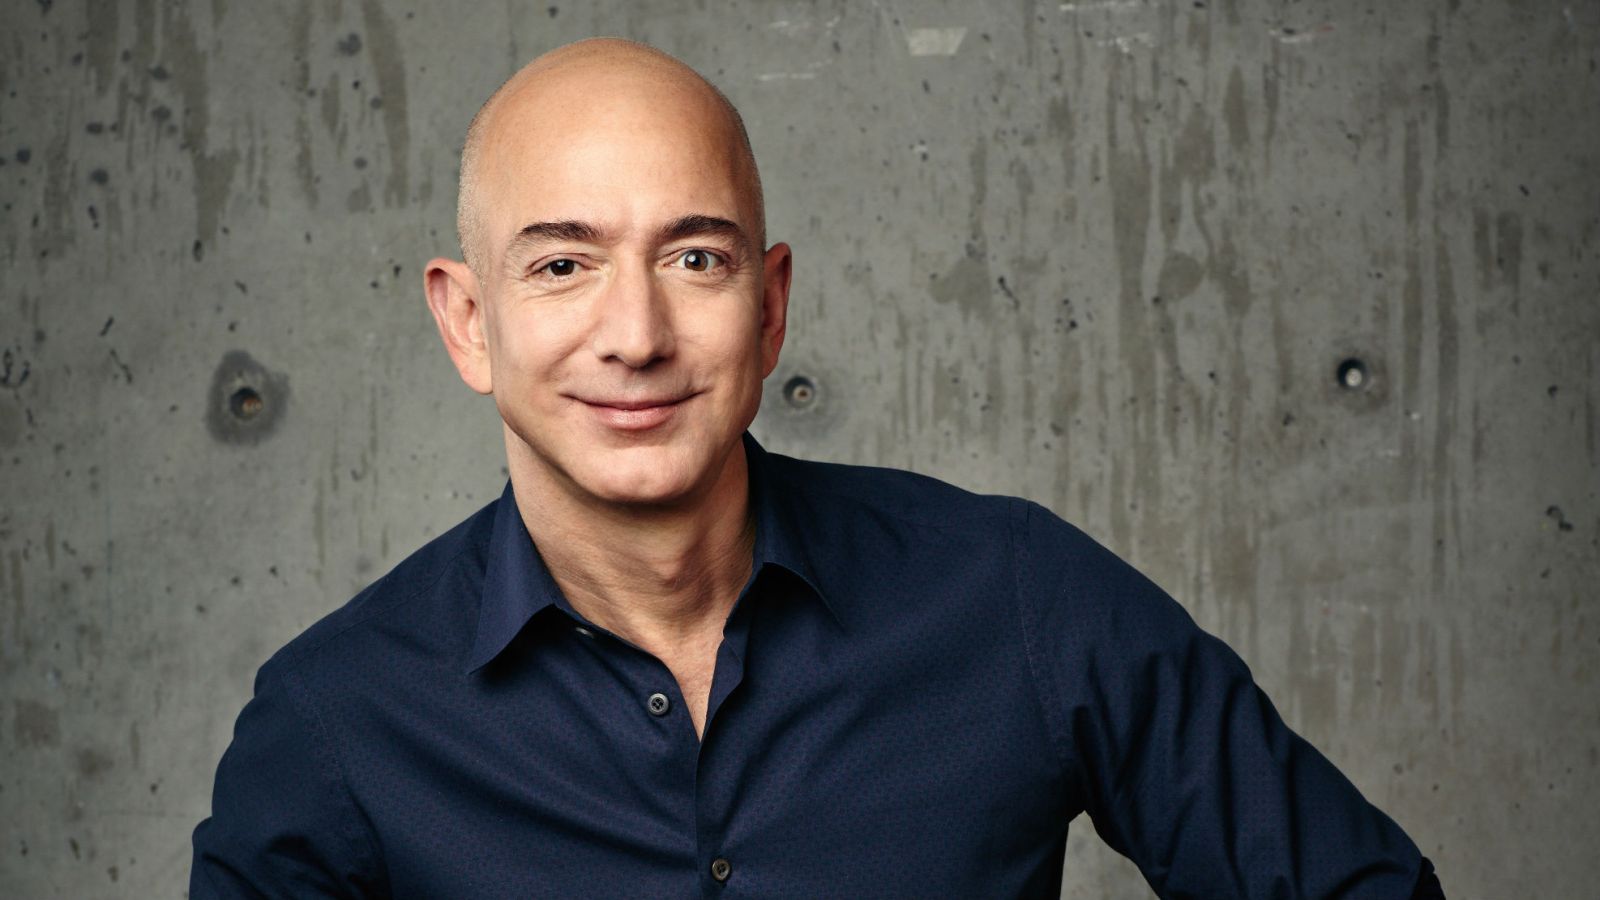 Bezos To Be Inducted Into Logistics Hall Of Fame